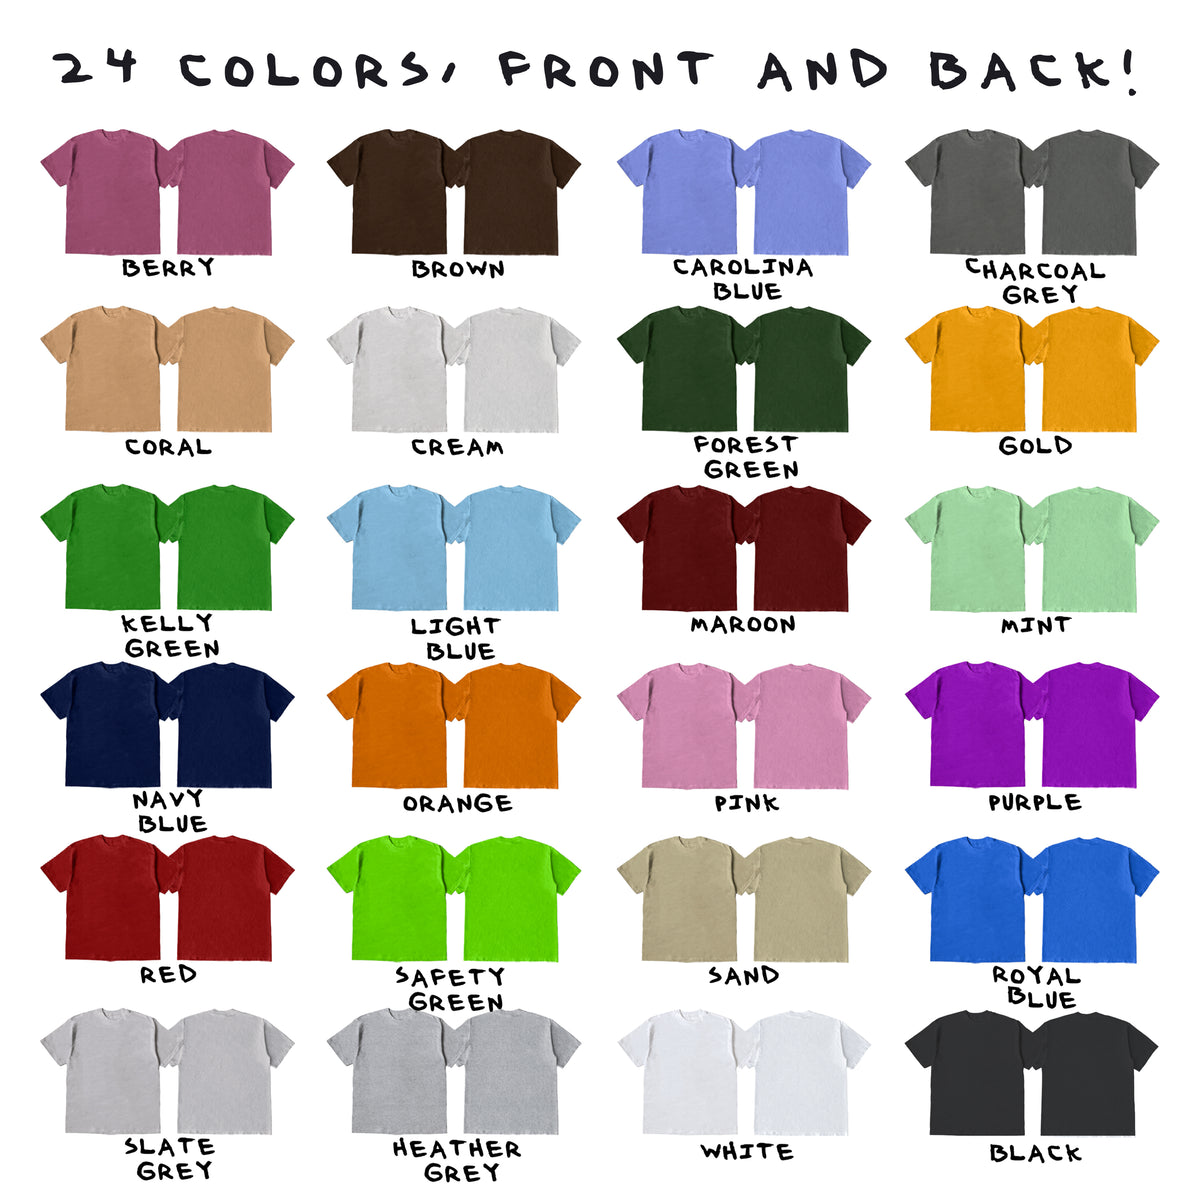 The REENO Studios T-Shirt Mockup Pack – Paint A Brighter Color